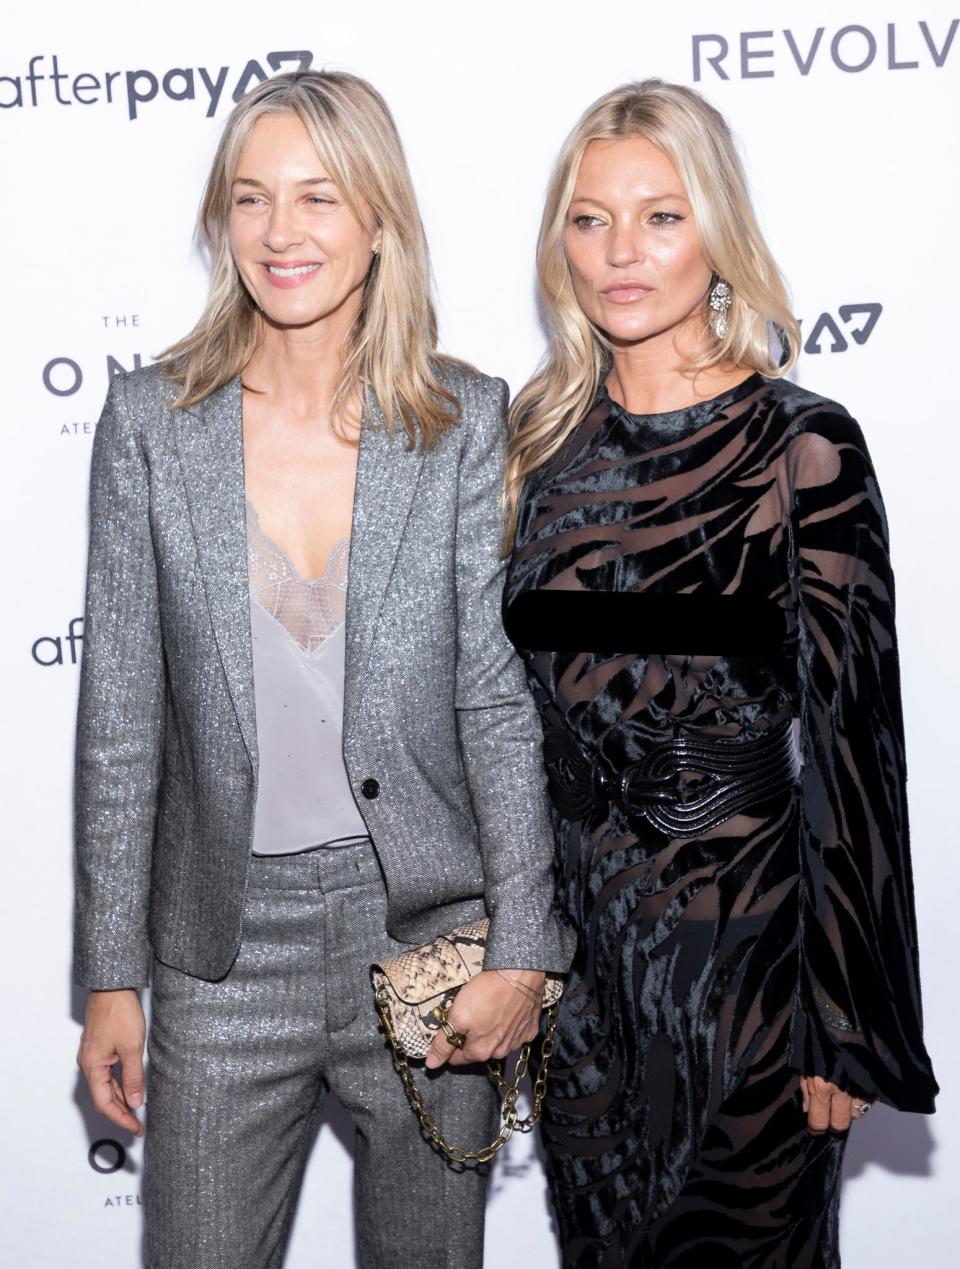 Cecilia Bonstrom and Kate Moss in New York City in 2019.